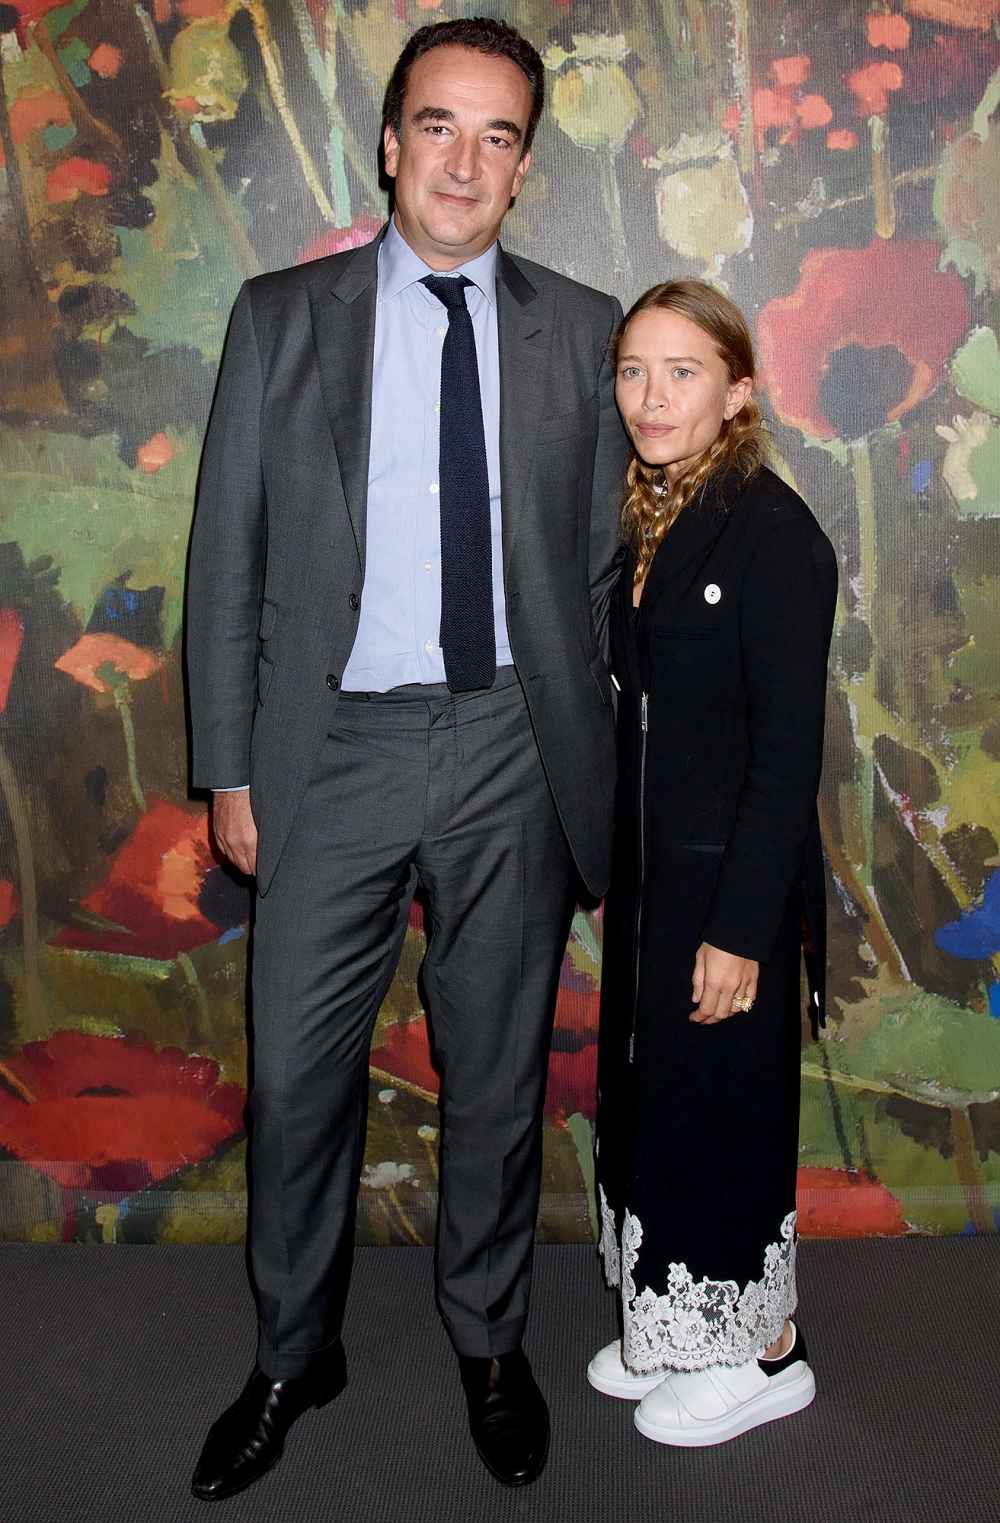 Mary-Kate Olsen Wanted to File for Divorce From Olivier Sarkozy Sooner